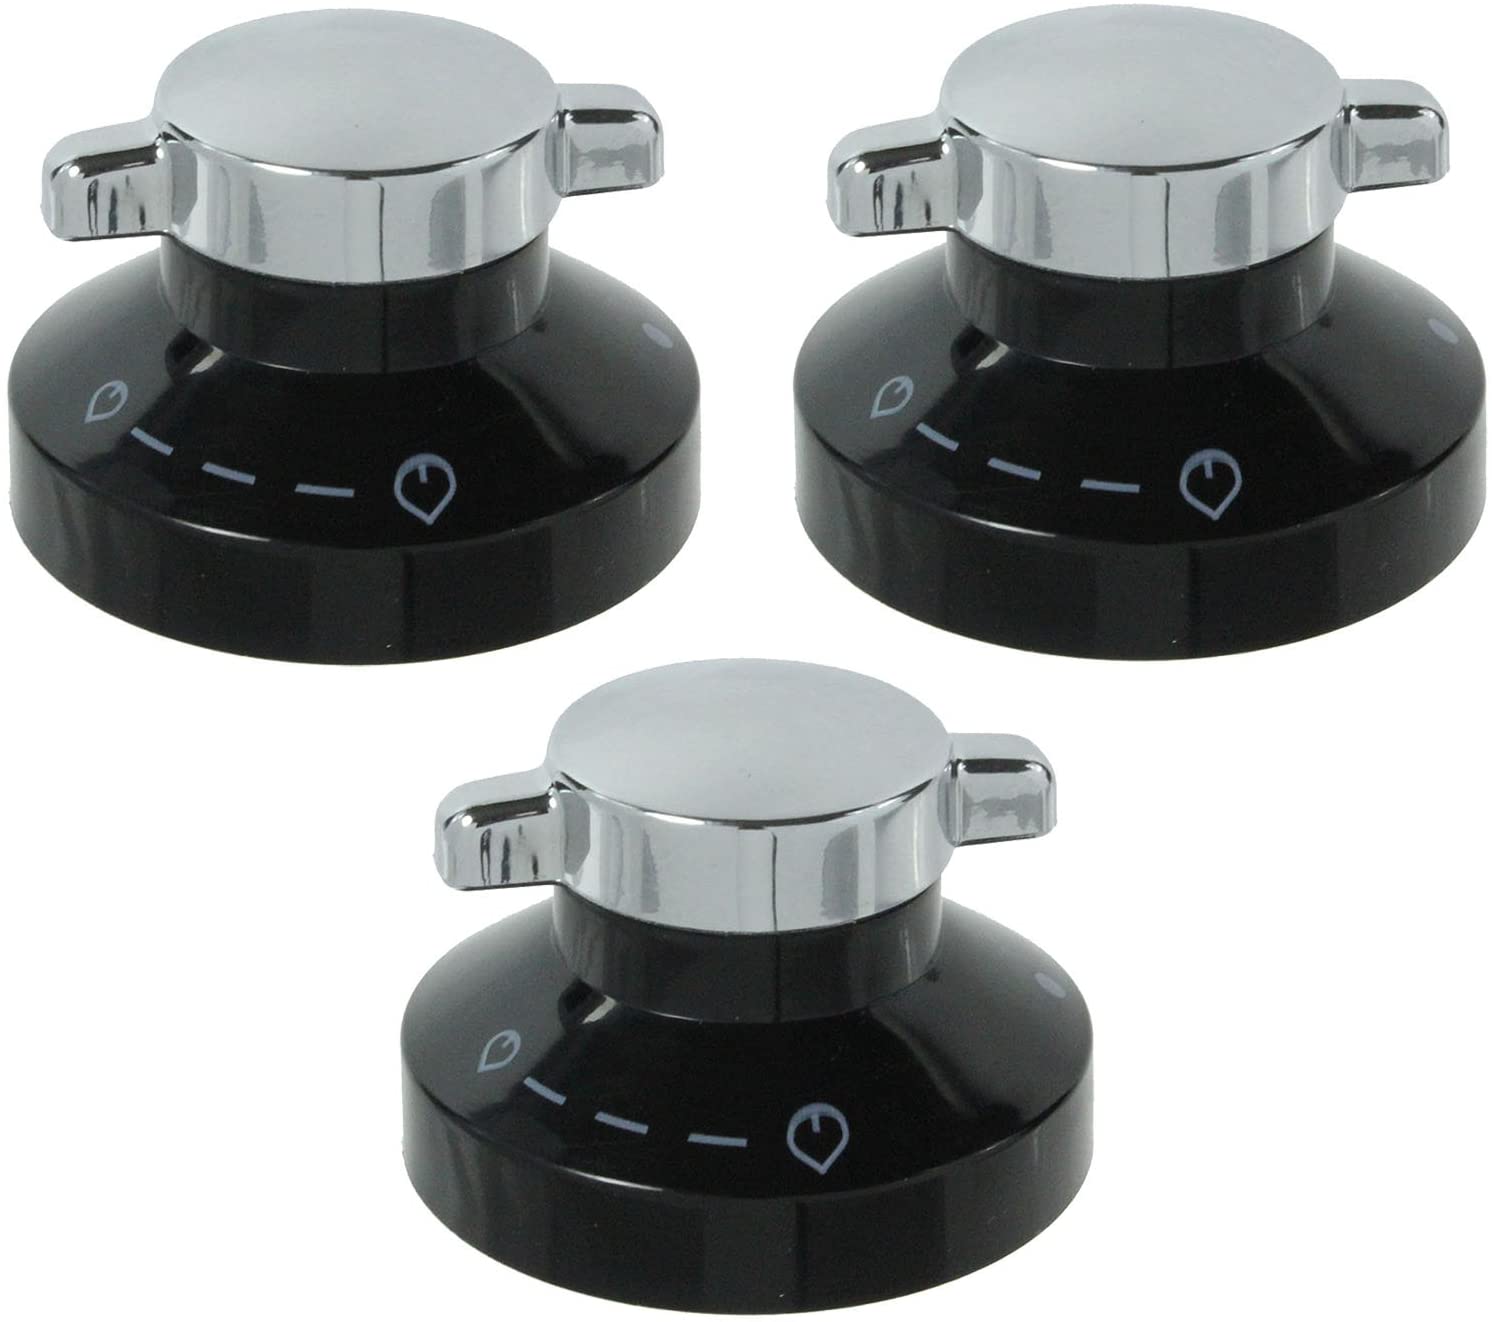 Belling New World Stoves Control Knob Dial for Cooker Hob (Black / Silver, Pack of 3 x Knobs) 081880326